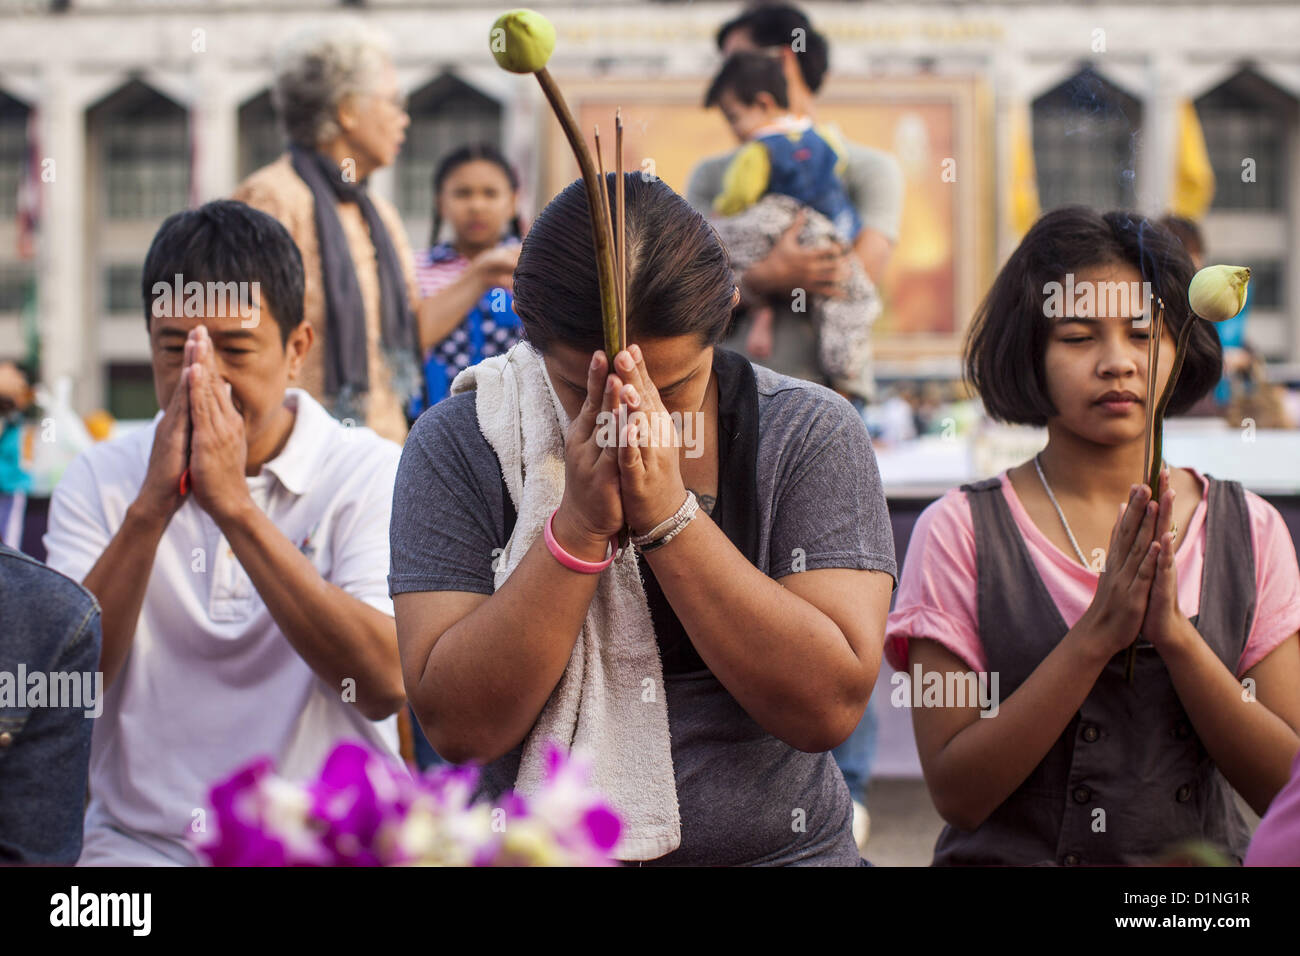 Jan. 1, 2013 - Bangkok, Thailand - People pray at a shrine during a special merit making ceremony at Bangkok City Hall New Year's morning. Many Thais go to Buddhist temples and shrines to ''make merit'' for the New Year. The traditional Thai New Year is based on the lunar calender and is celebrated in April, but the Gregorian New Year is celebrated throughout the Kingdom. (Credit Image: © Jack Kurtz/ZUMAPRESS.com) Stock Photo